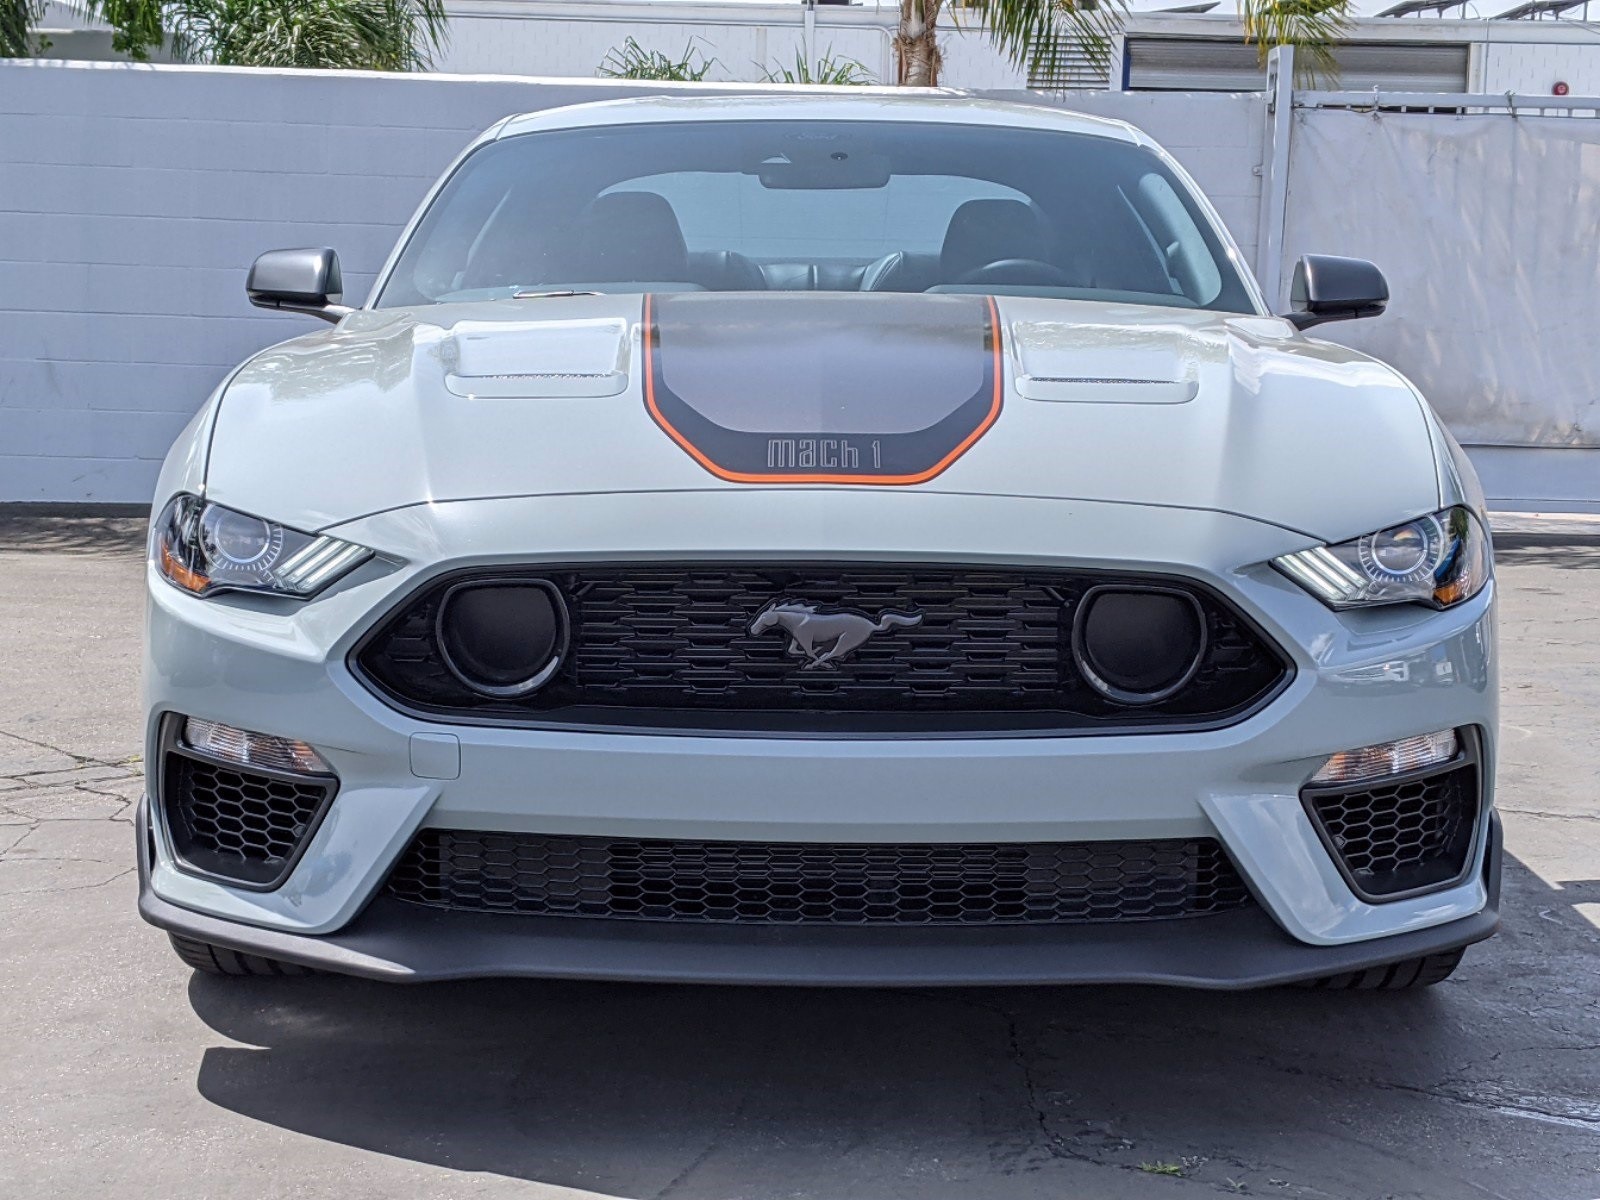 Fighter Jet Gray 2021 Ford Mustang Mach 1 Up for Grabs With 82Miles on 5.0L V8 autoevolution